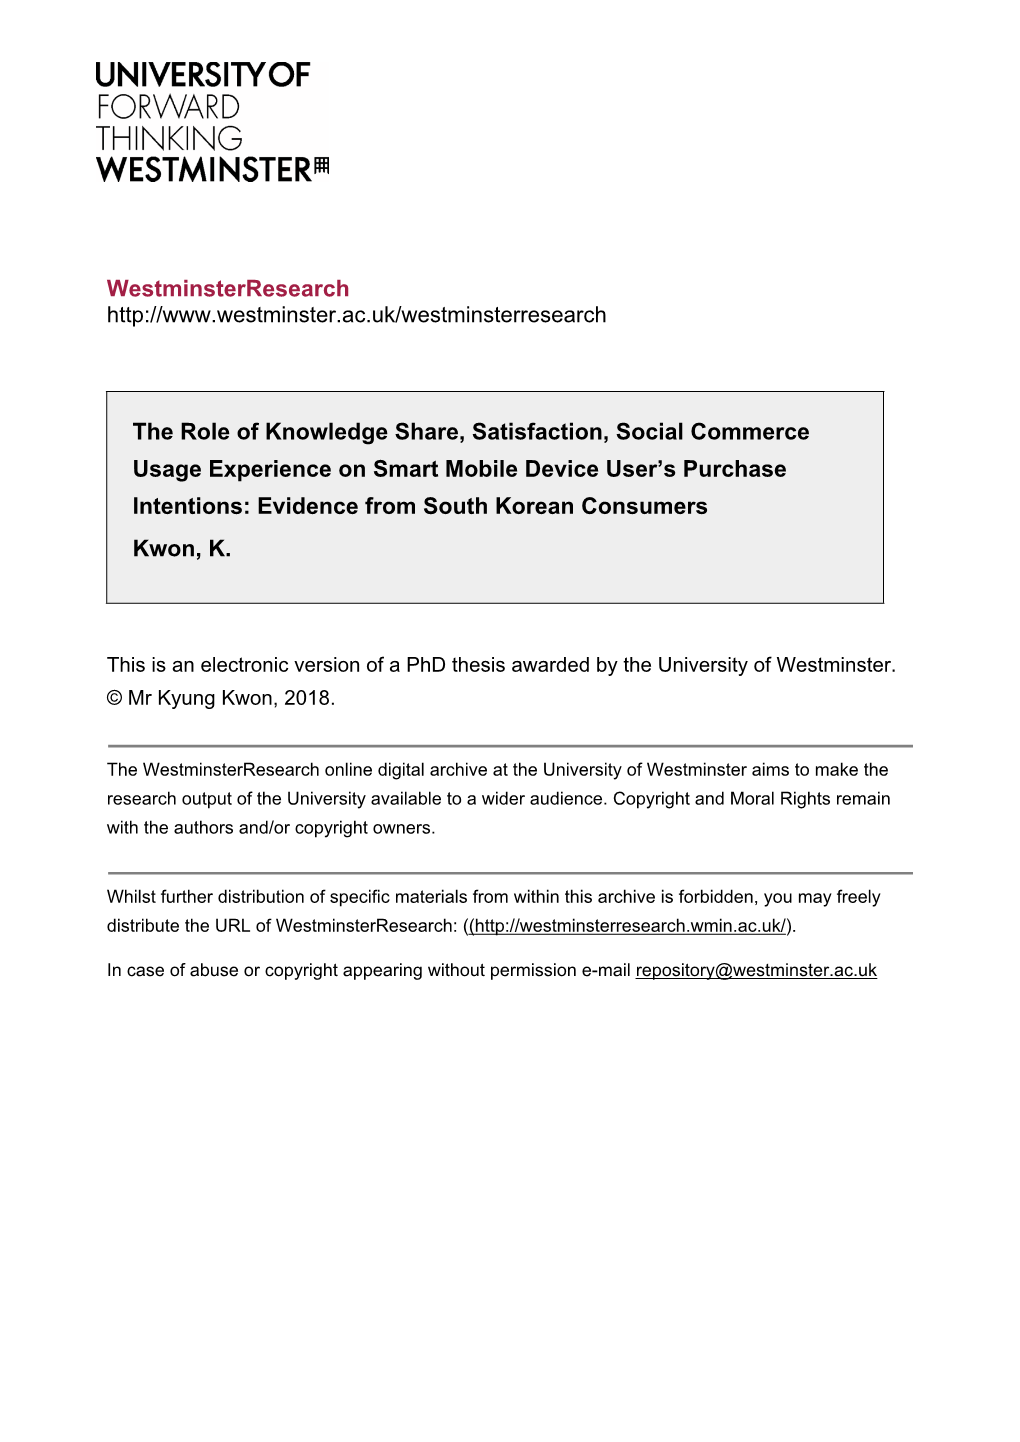 Westminsterresearch the Role of Knowledge Share, Satisfaction